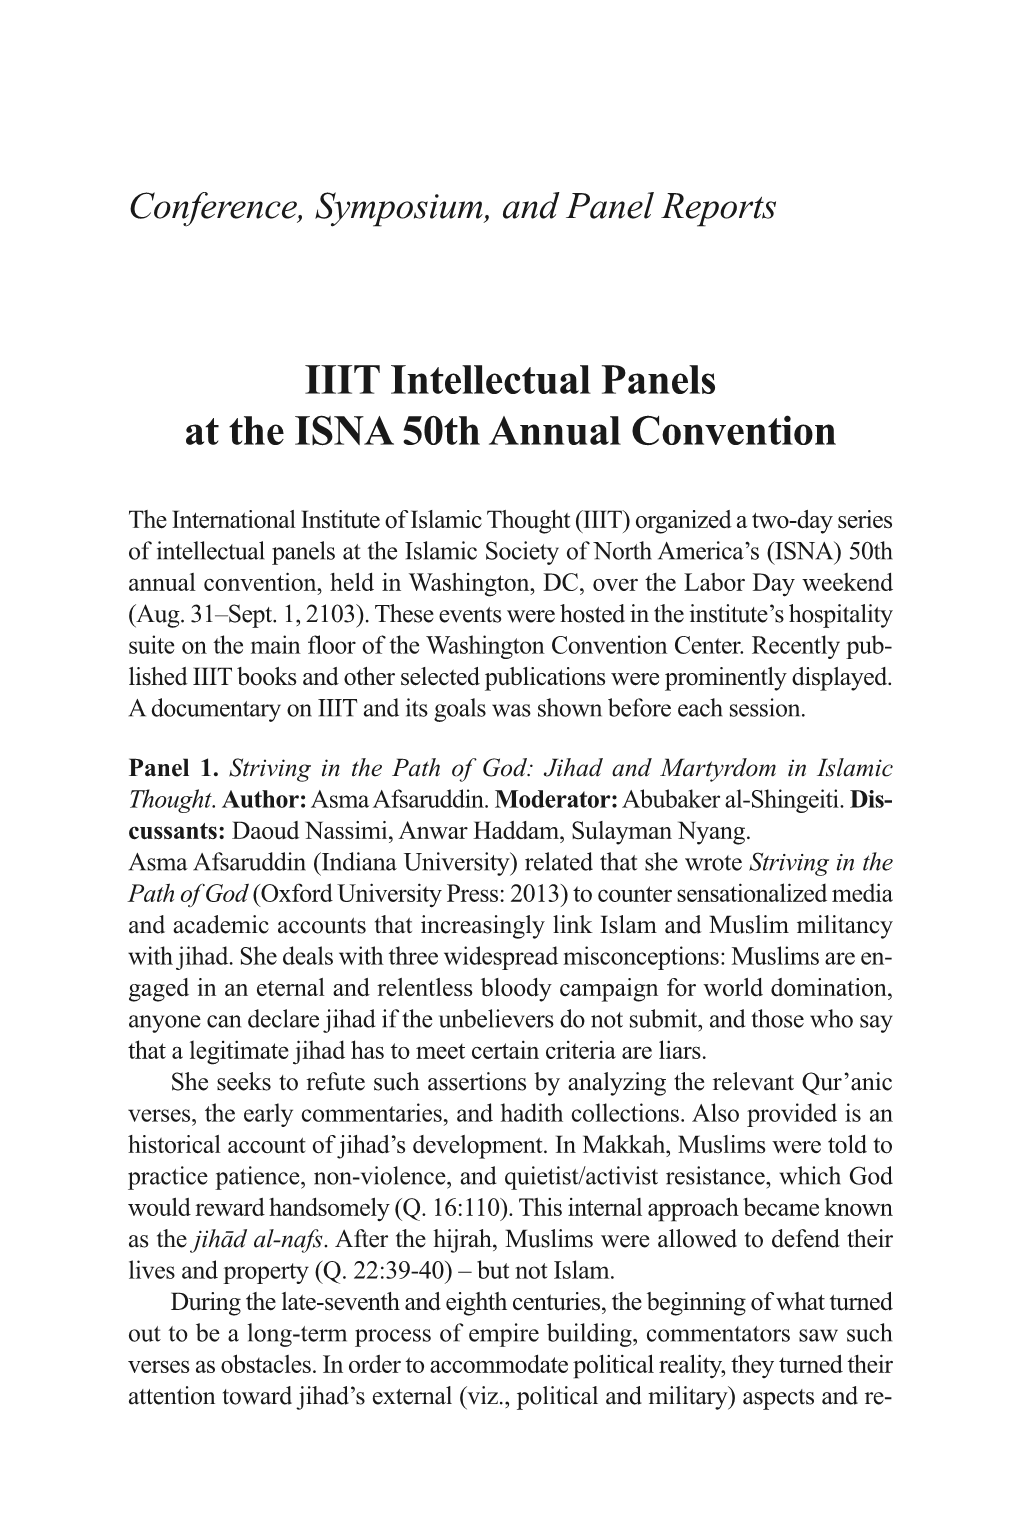 IIIT Intellectual Panels at the ISNA 50Th Annual Convention